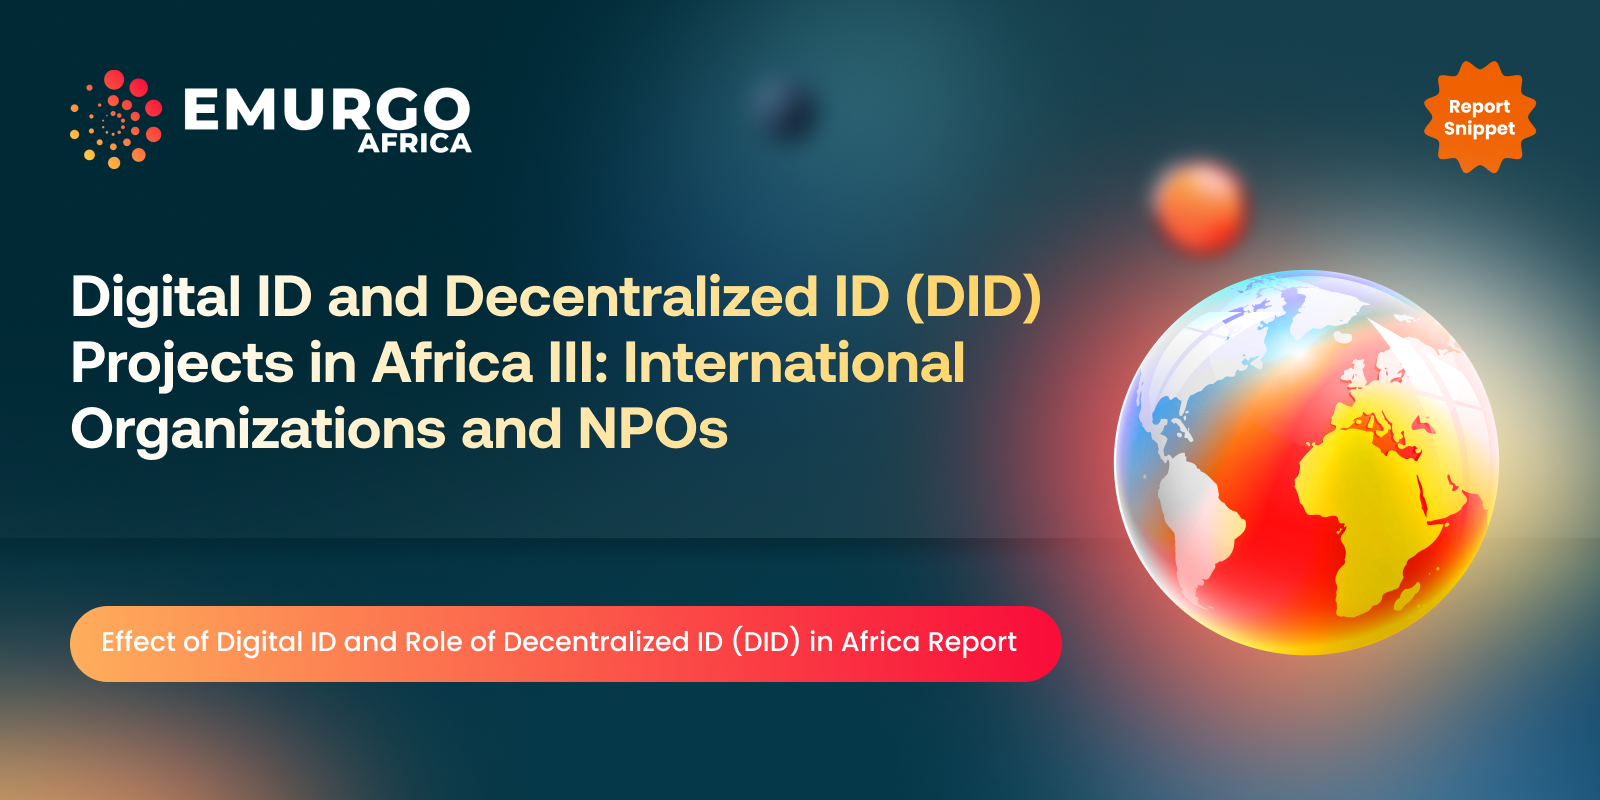 Digital ID and Decentralized ID (DID) Projects in Africa III: International Organizations and NPOs